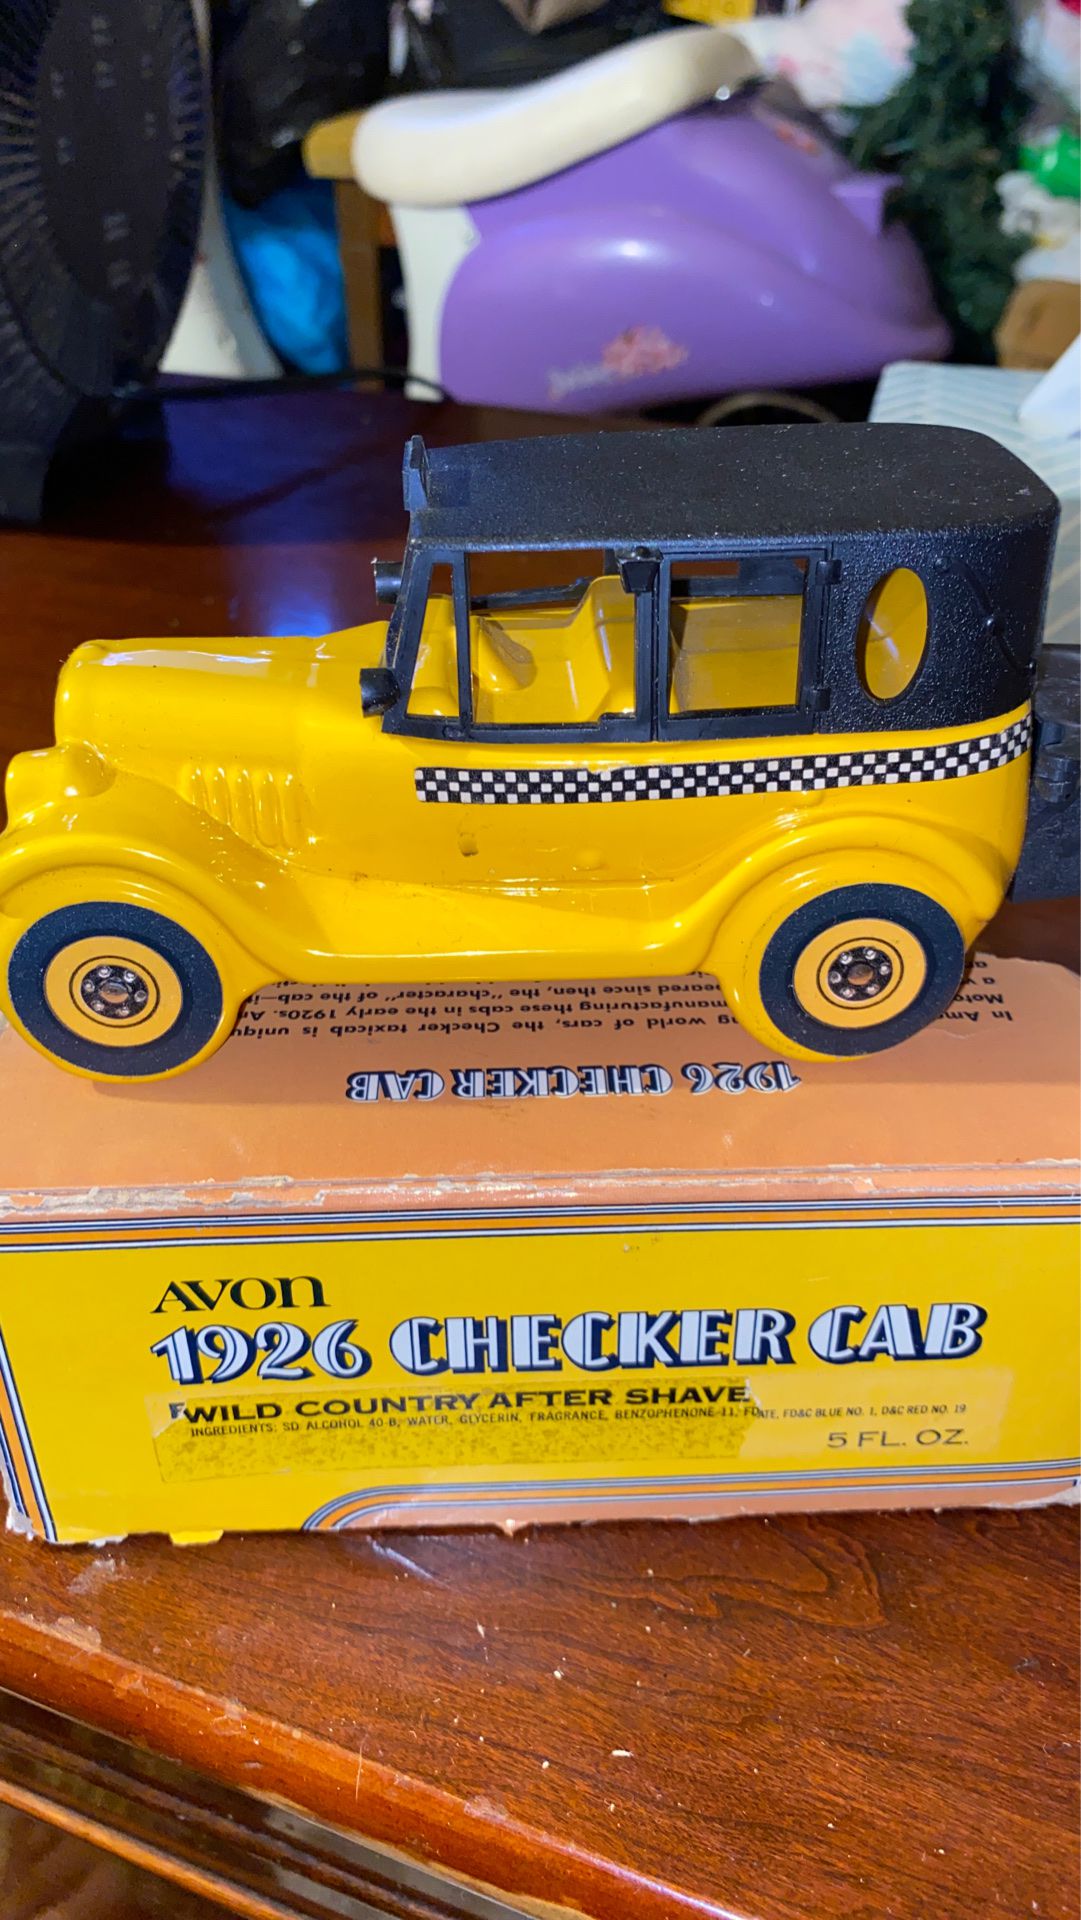 Avon 1926 checker cab wild country after shave